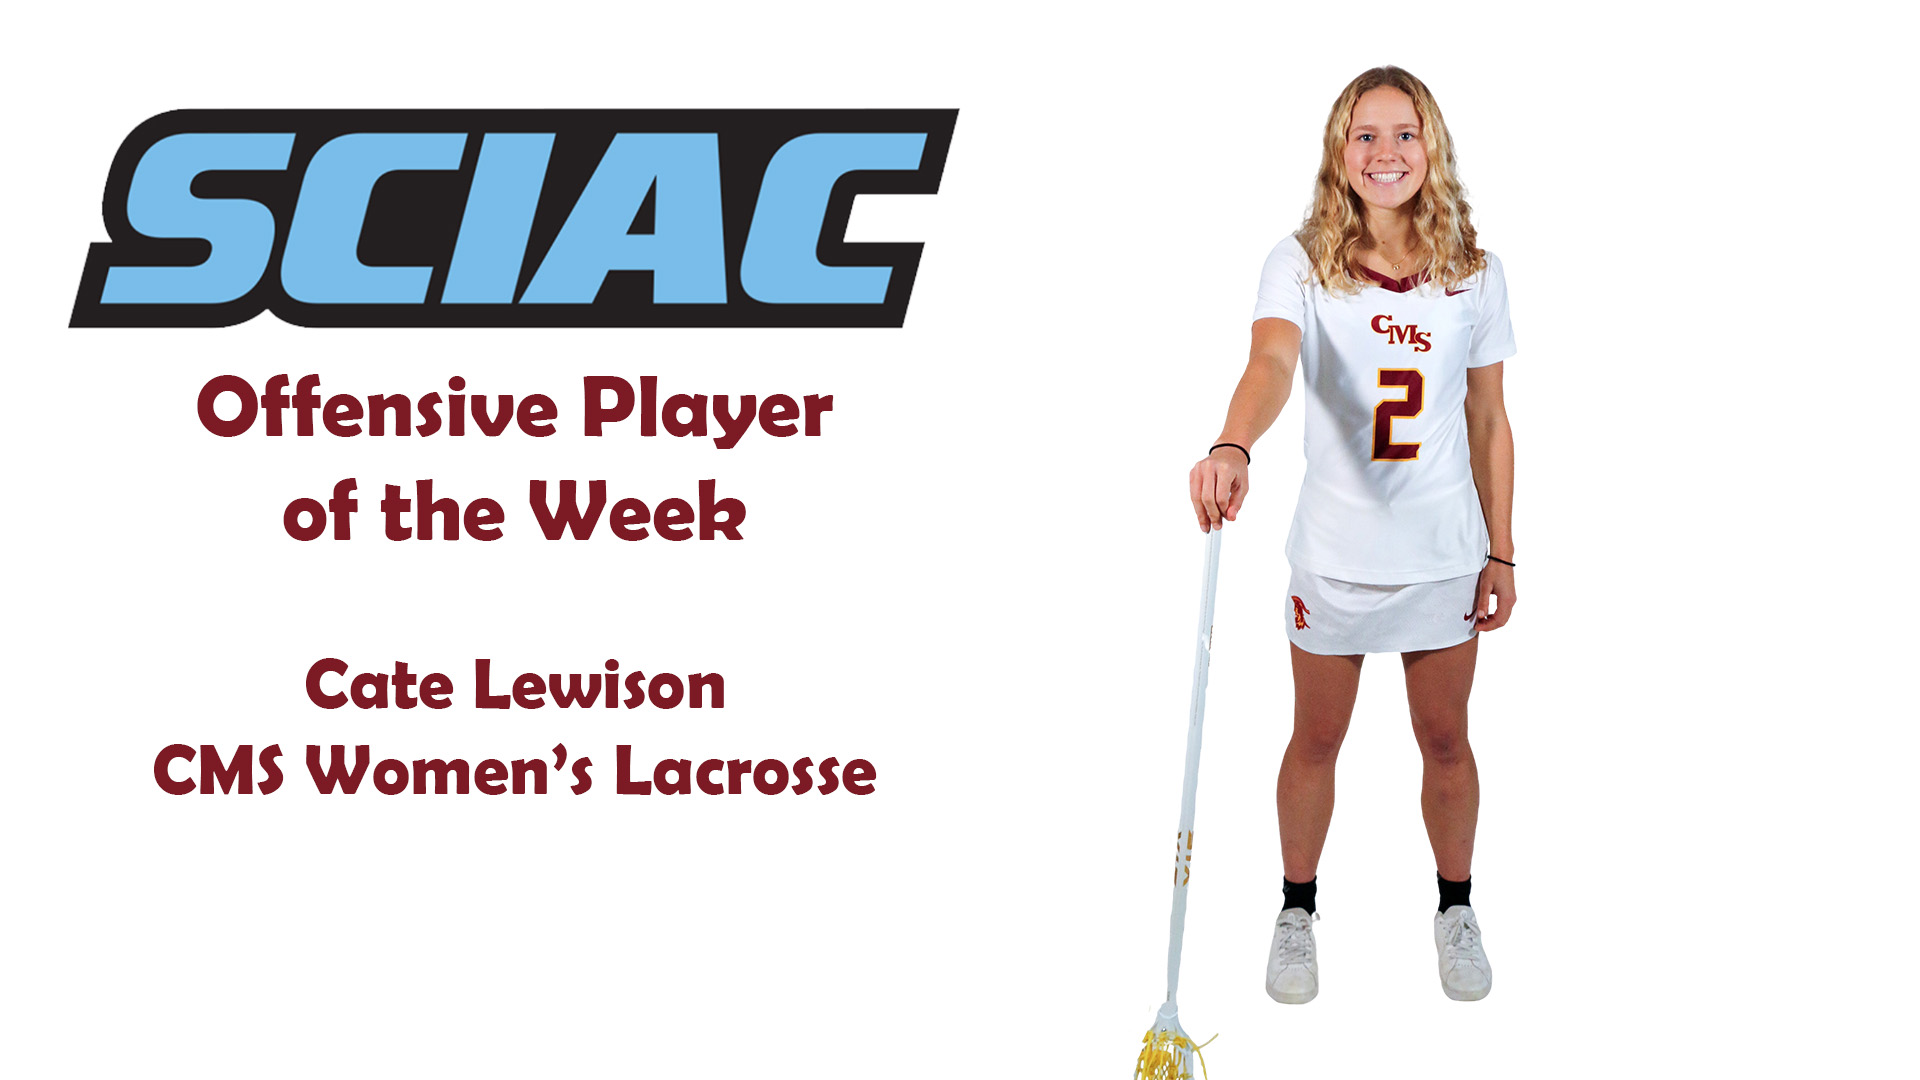 Cate Lewison posed shot with SCIAC logo